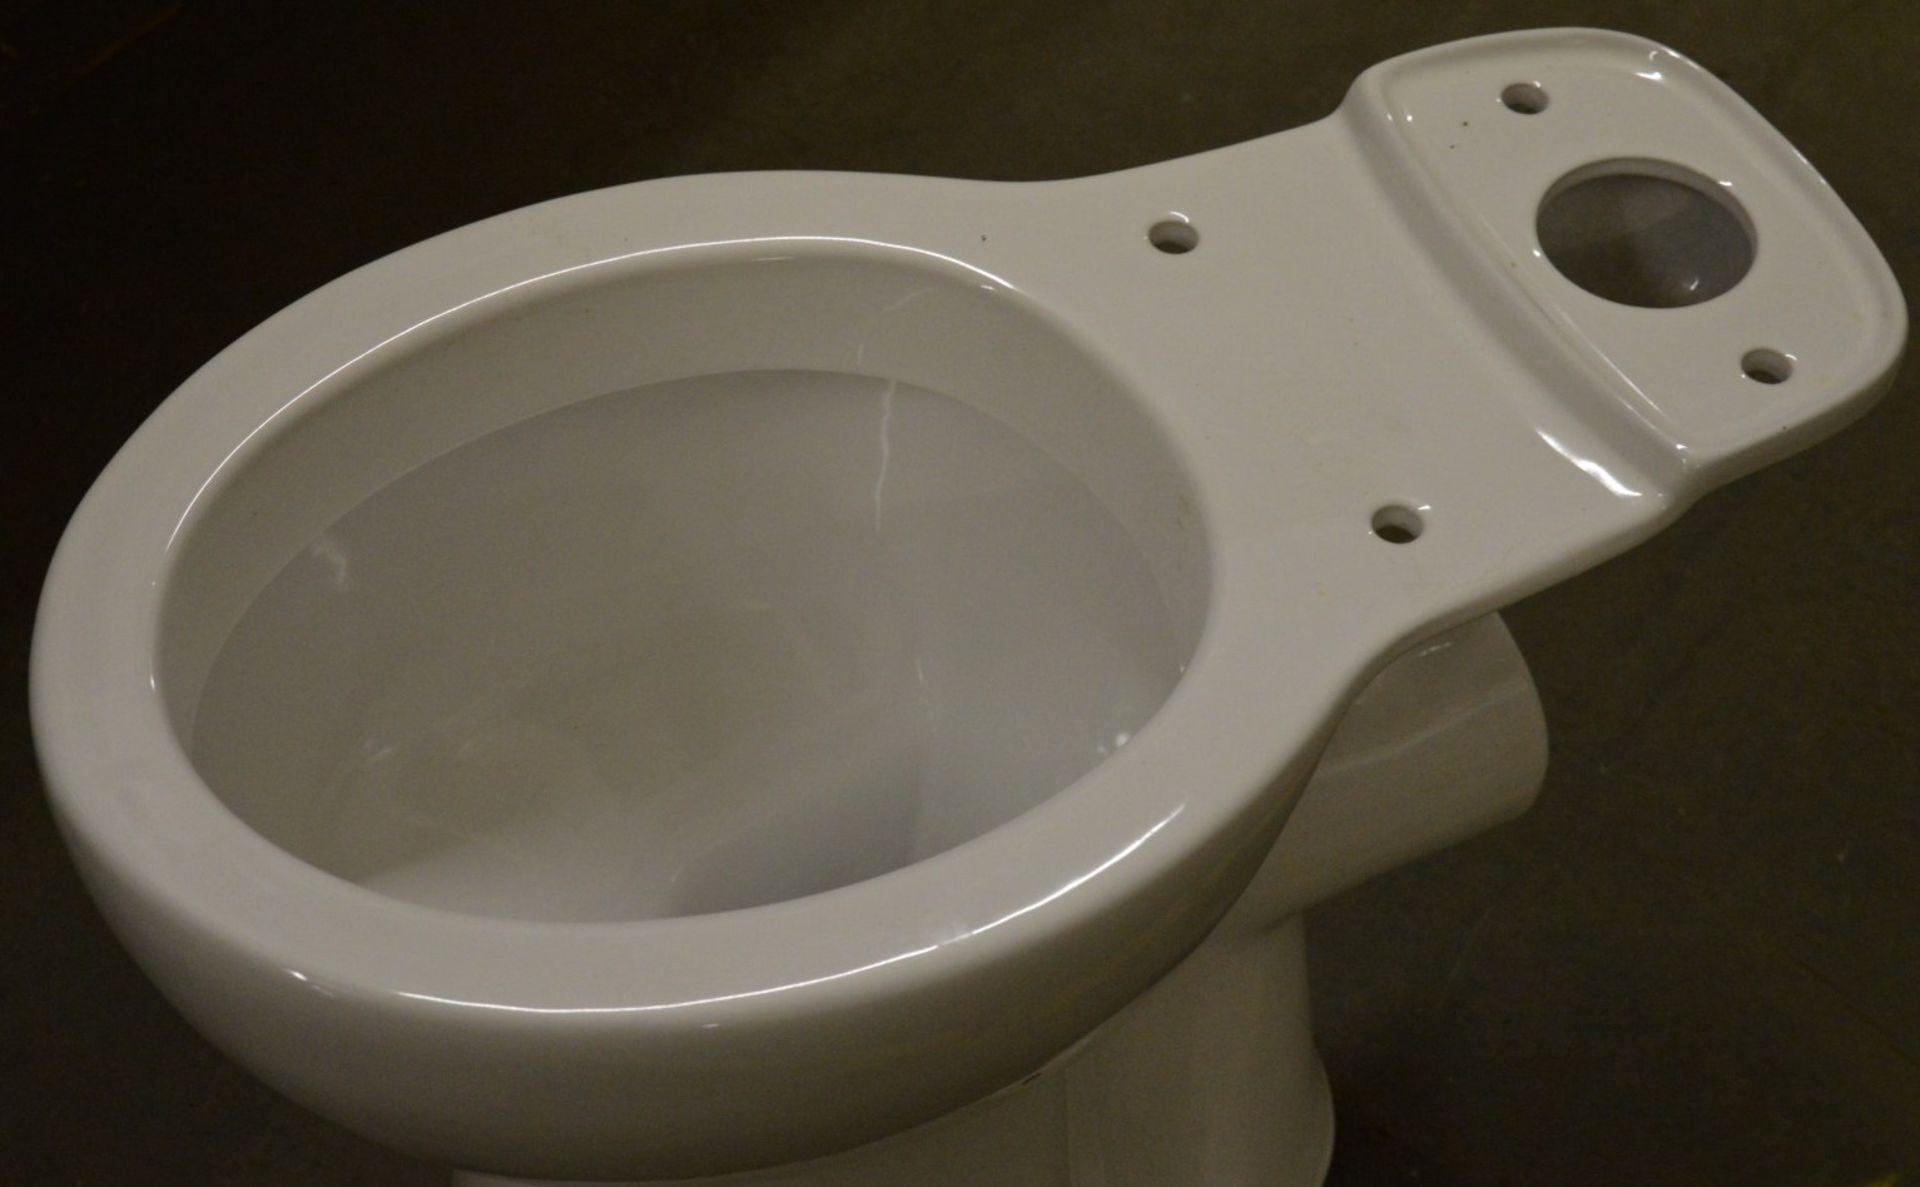 1 x Vogue Bathrooms DUNHILL Close Coupled Toilet Pan - P Trap - Brand New and Boxed - Seat Not - Image 2 of 3